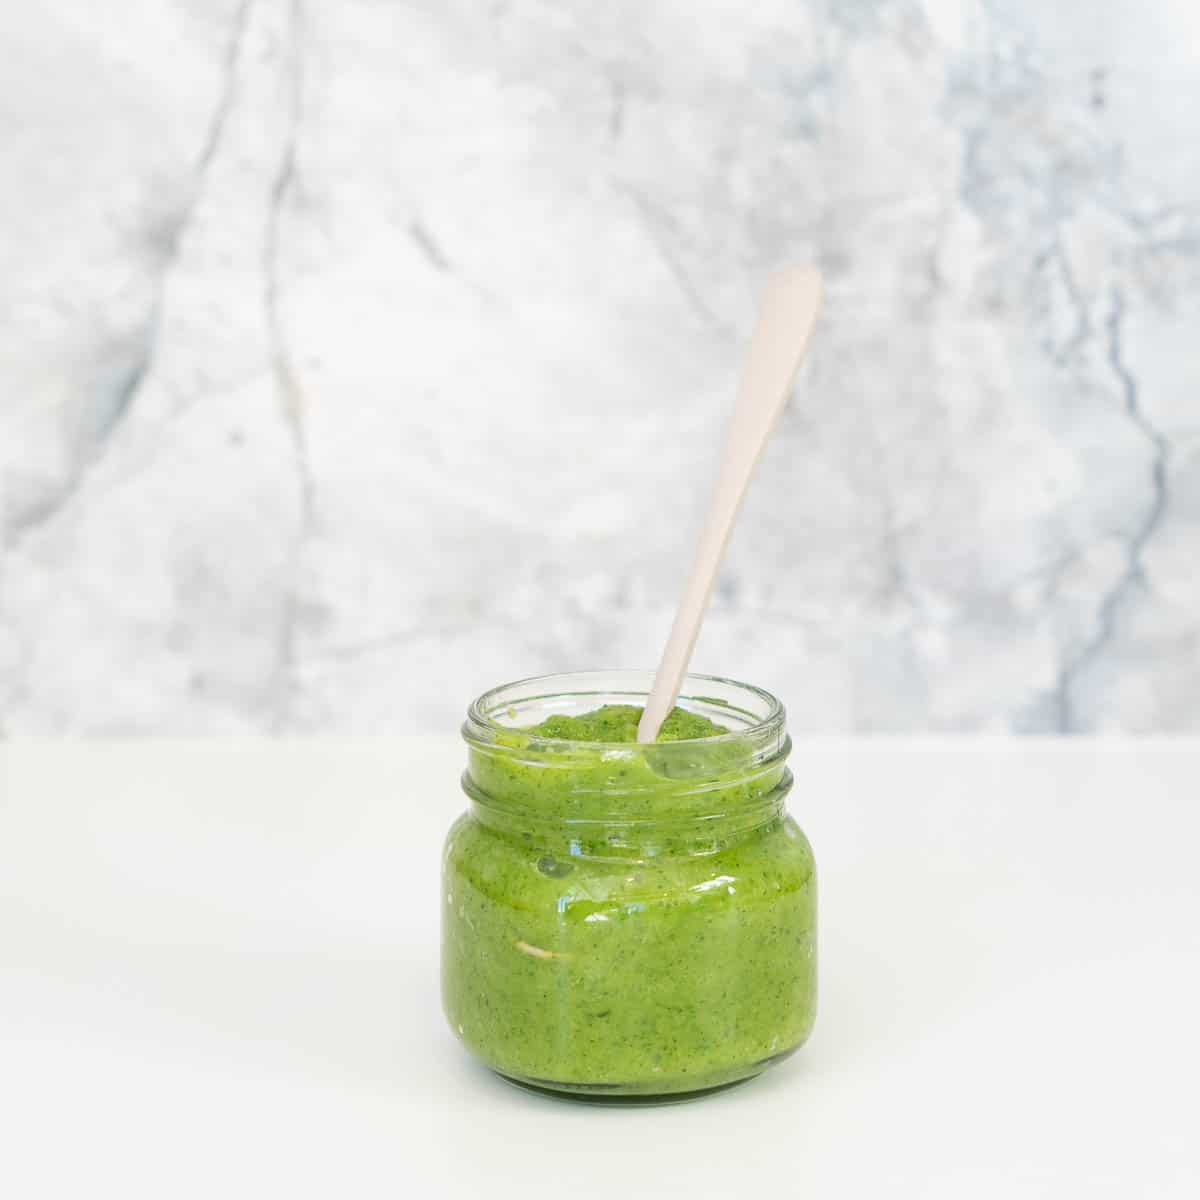 A glass jar of green zucchini puree sitting in front of a grey marble splashback.